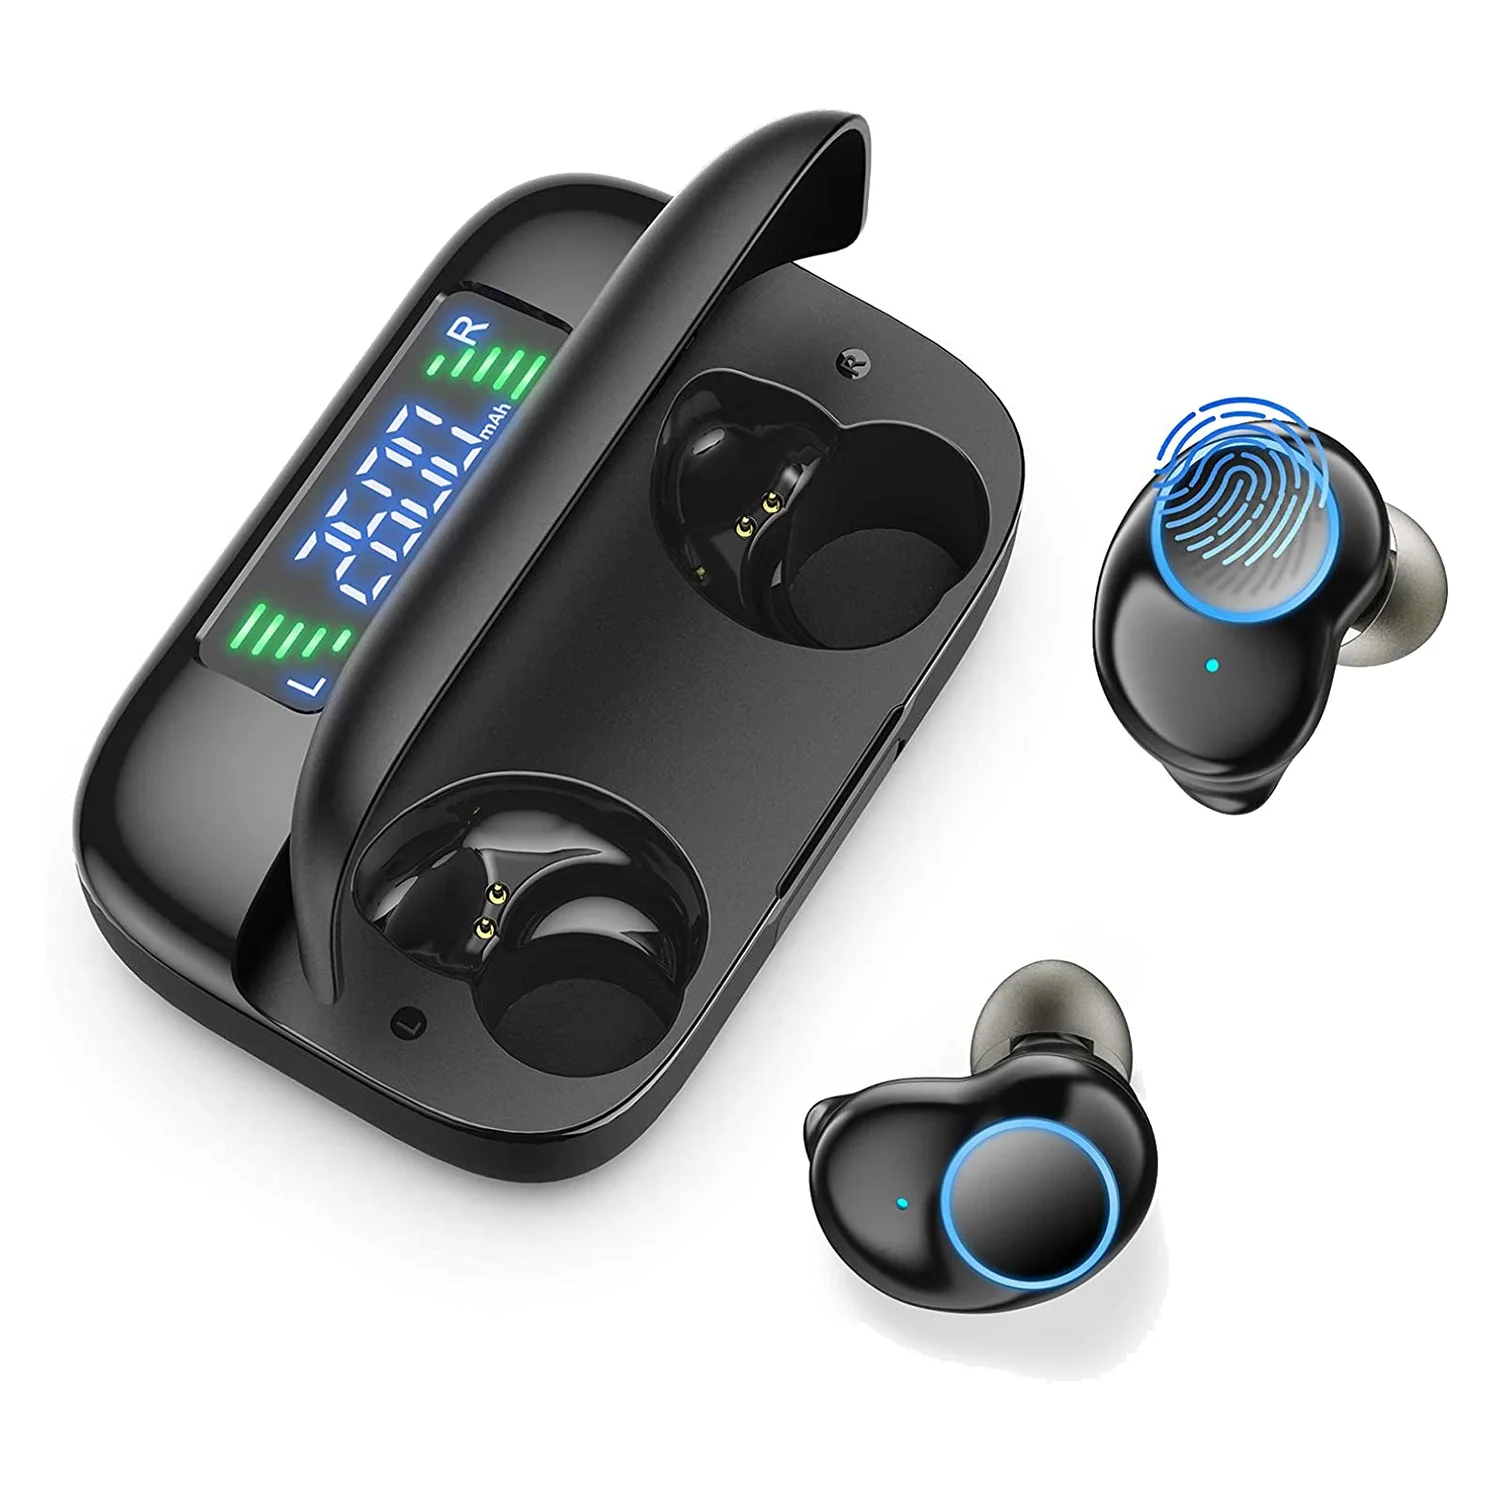 

TWS Wireless Earbuds Built in Mic Noise Cancelling Headphones 3D Stereo Voice Ear Buds Sports Hi-Fi Deep Bass Earbuds